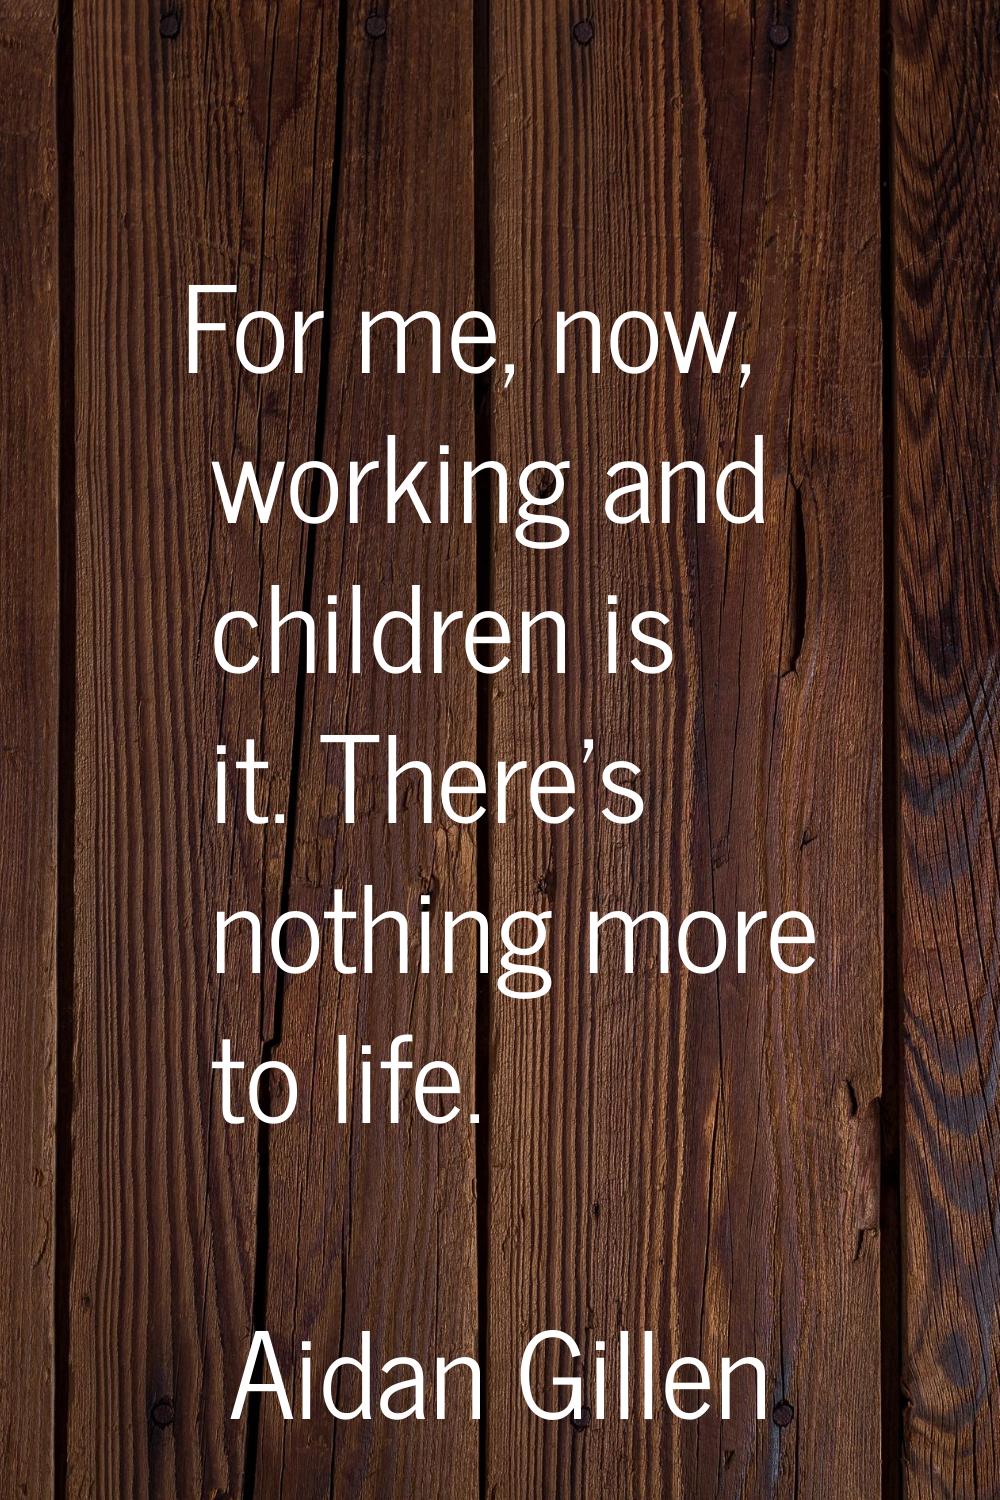 For me, now, working and children is it. There's nothing more to life.